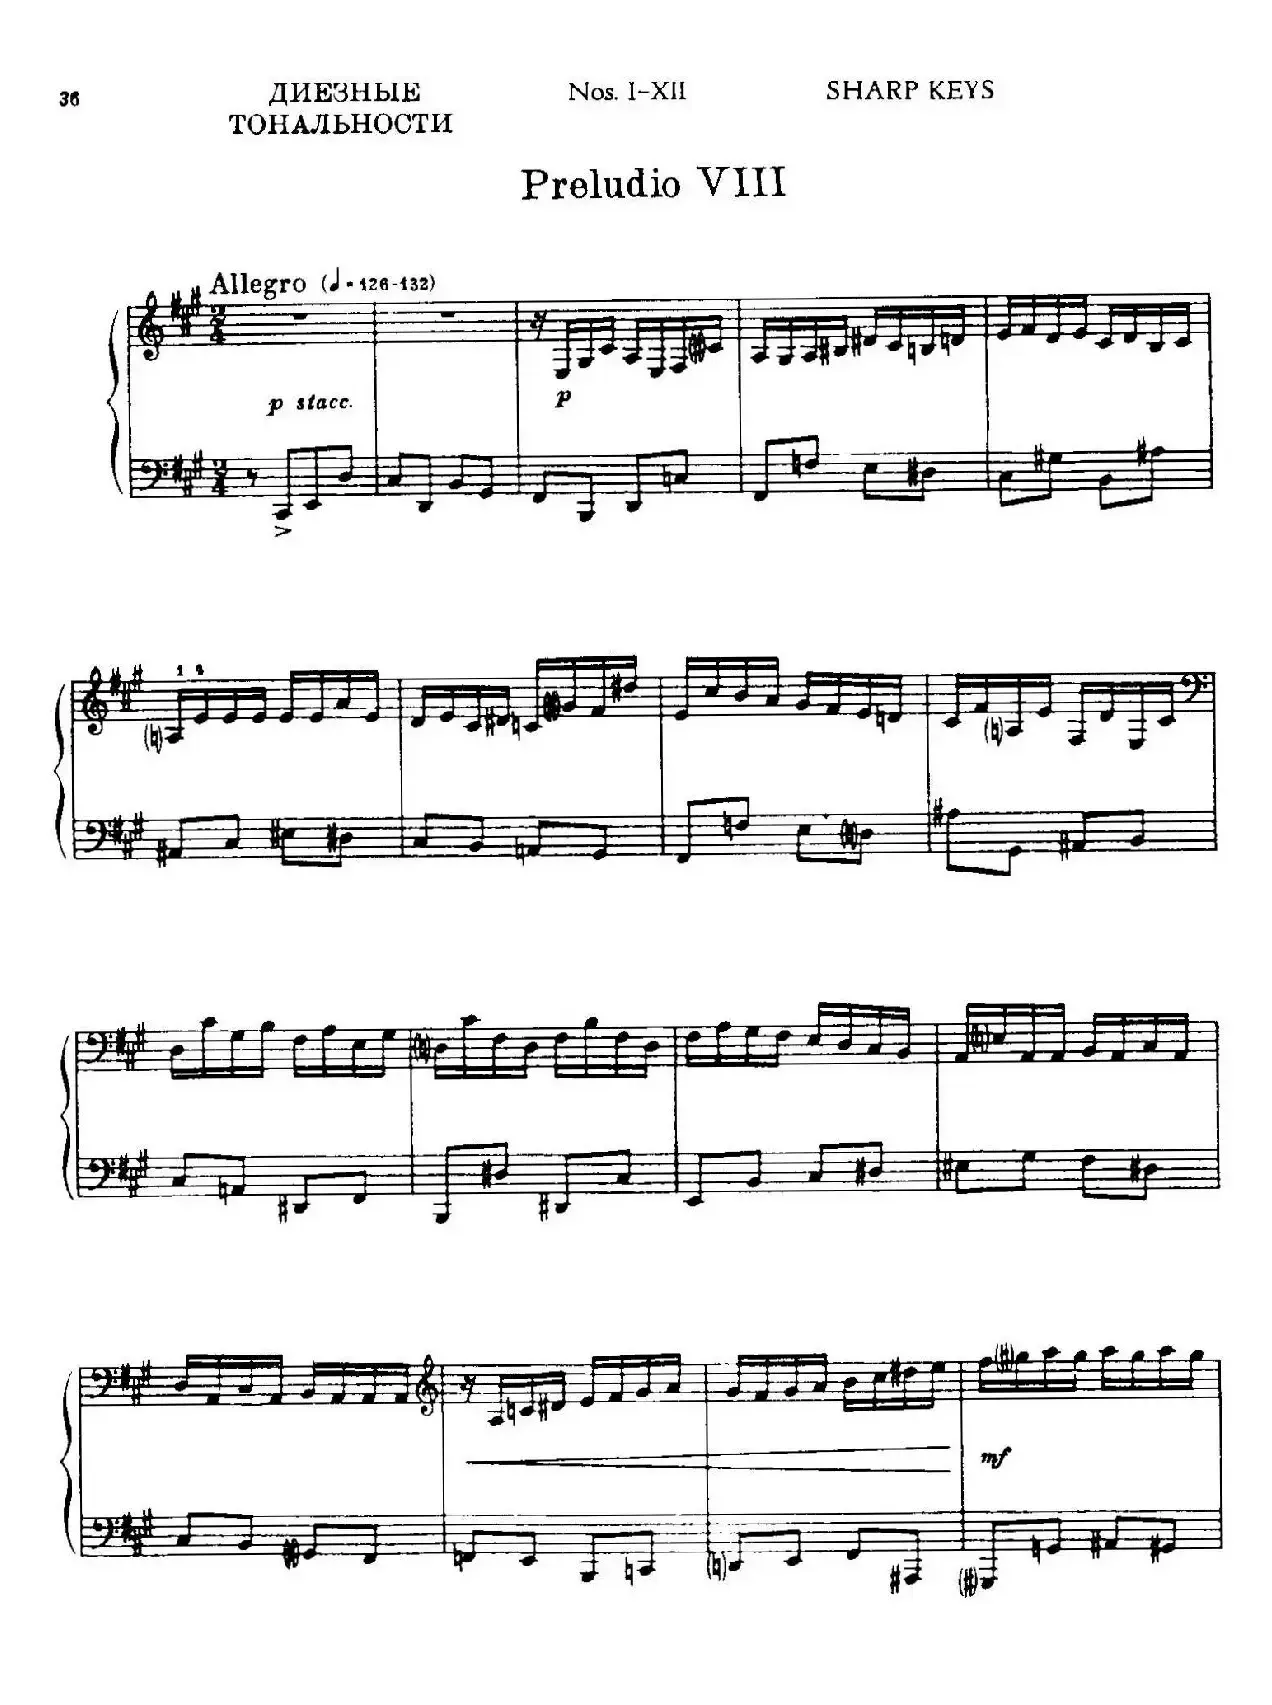 24 Preludes and Fugues Part.1 Op.45（24首前奏曲与赋格·第一部分·7）